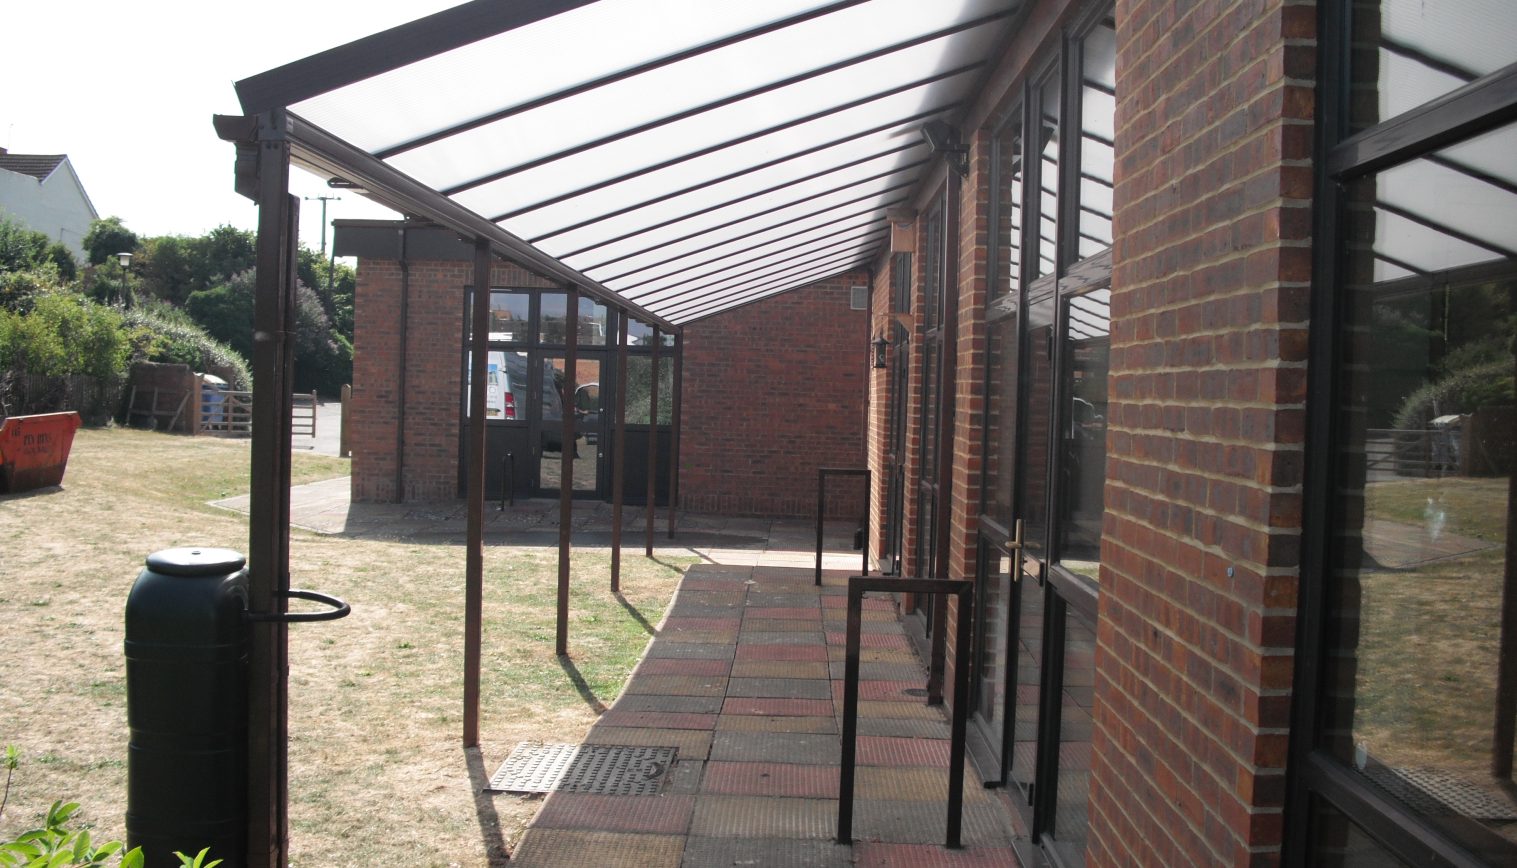 Burham C of E Primary School – Second Wall Mounted Canopy